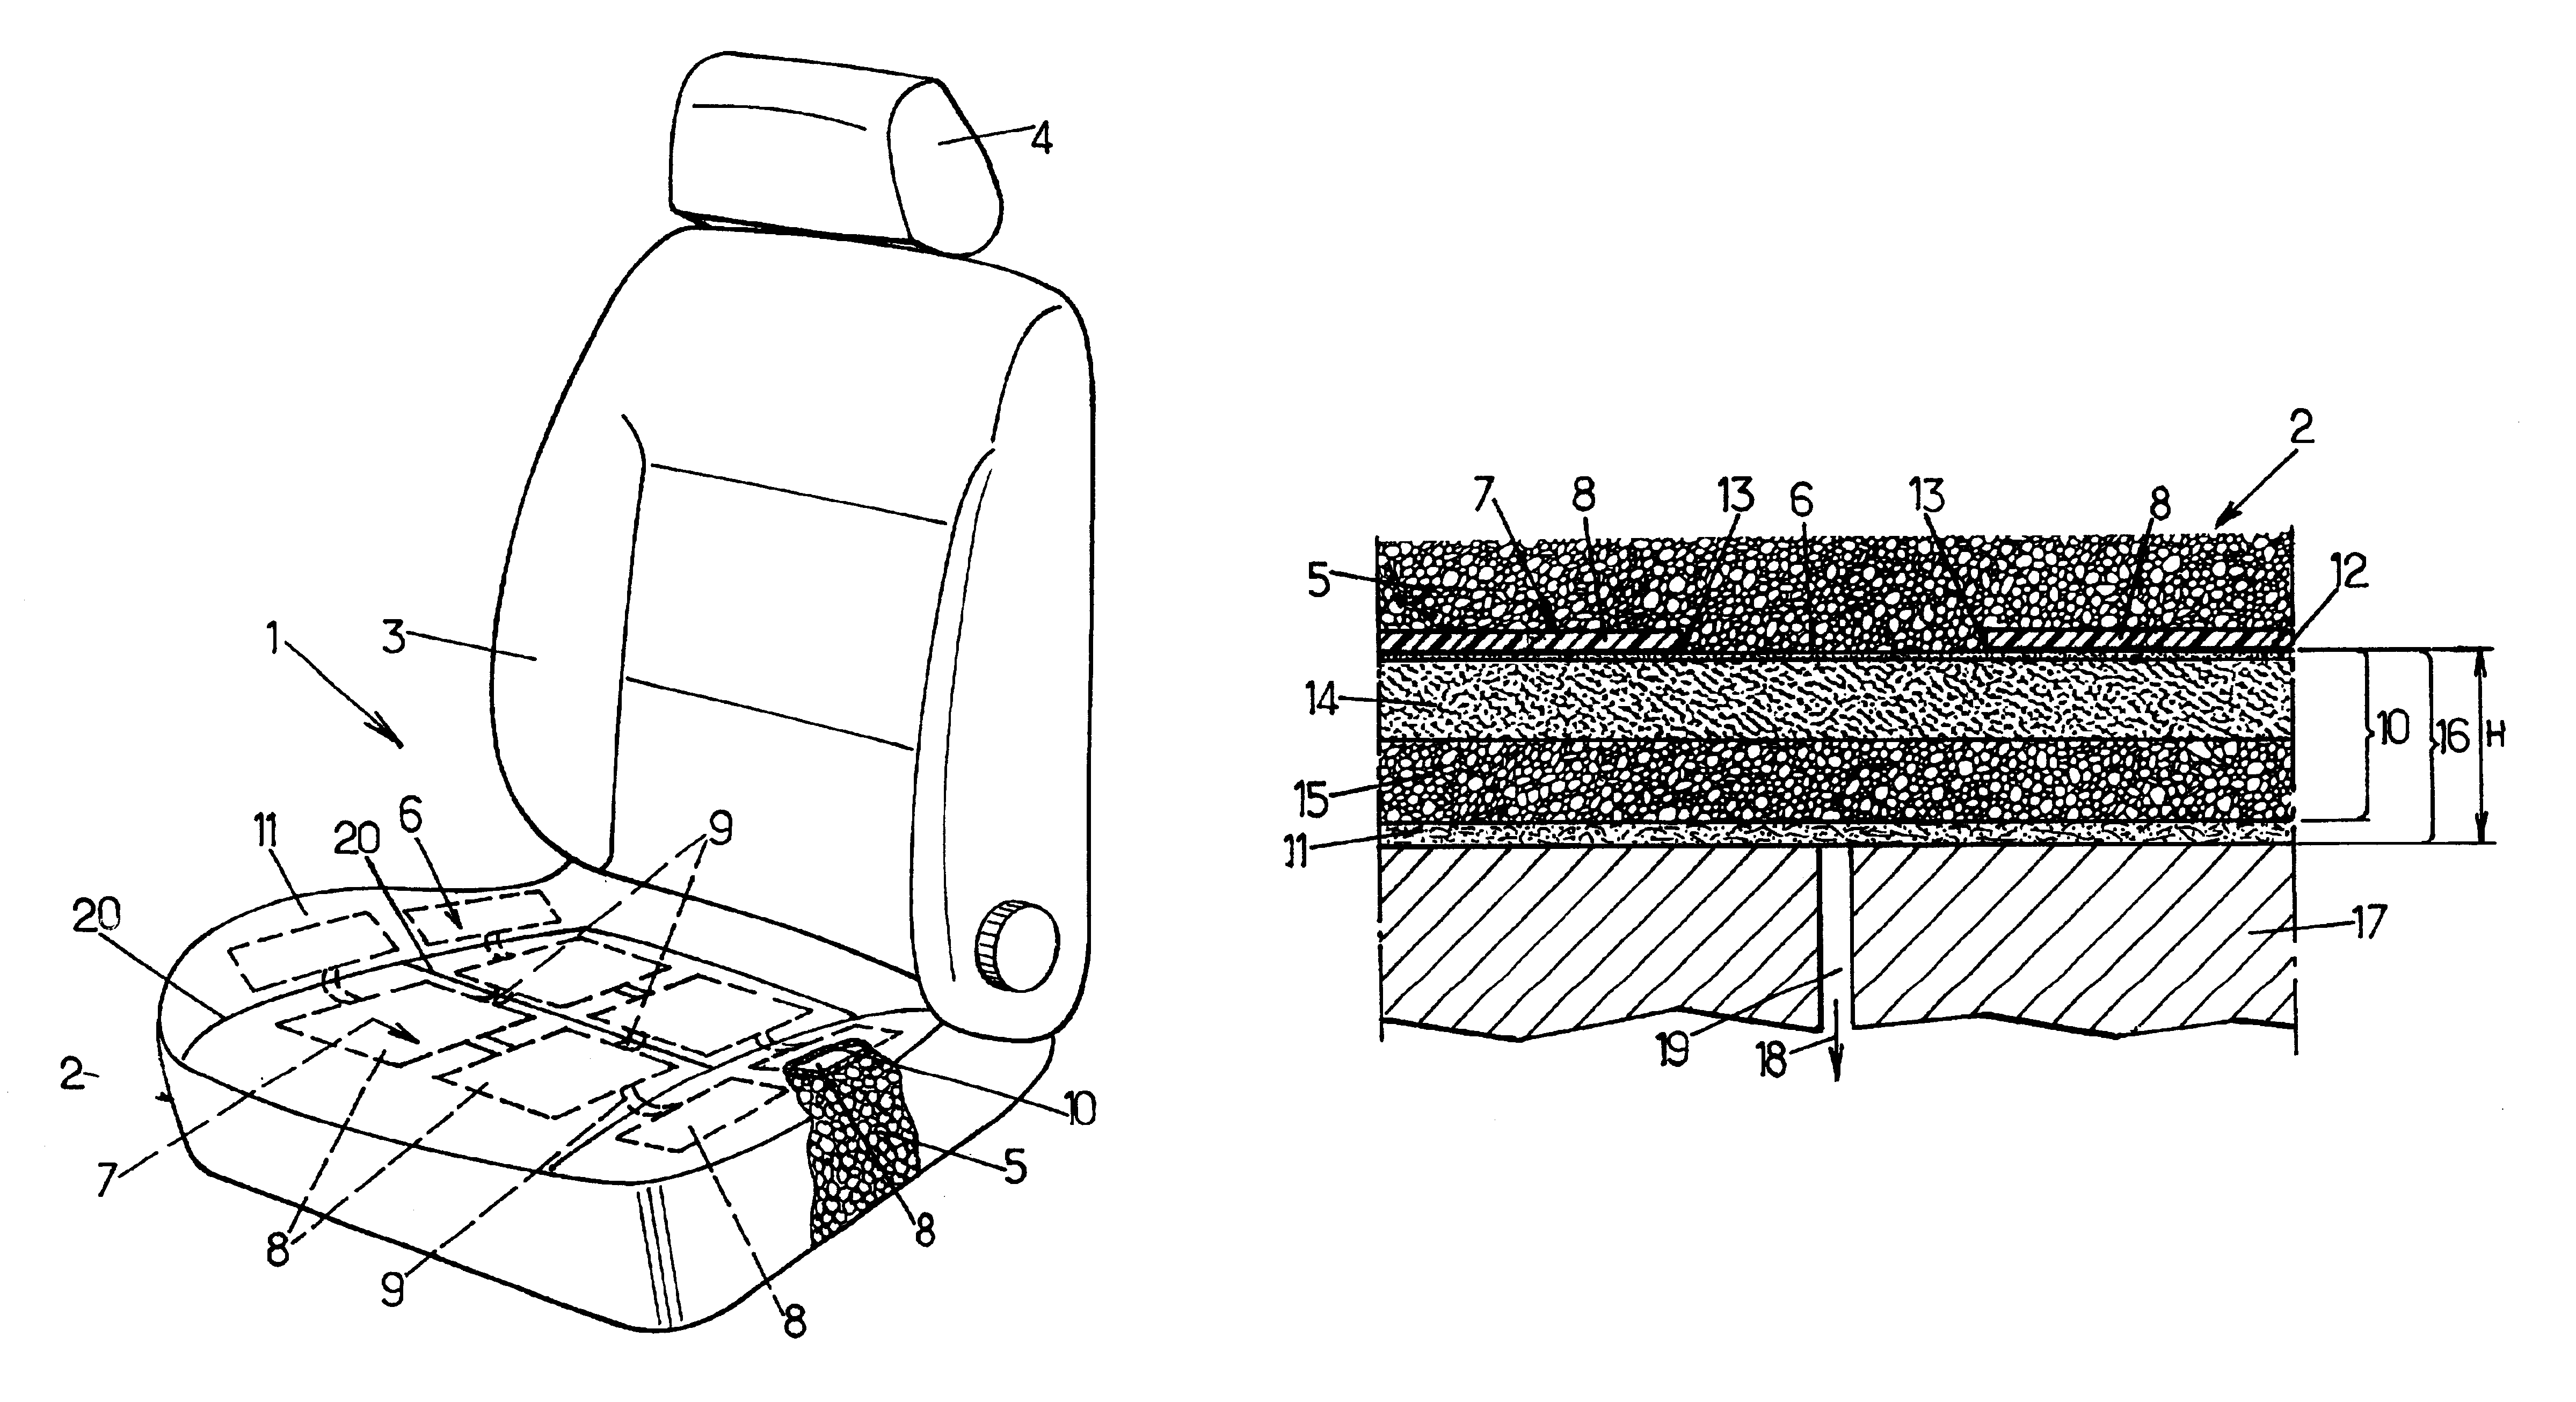 Padded element for a vehicle, and a method of manufacturing it